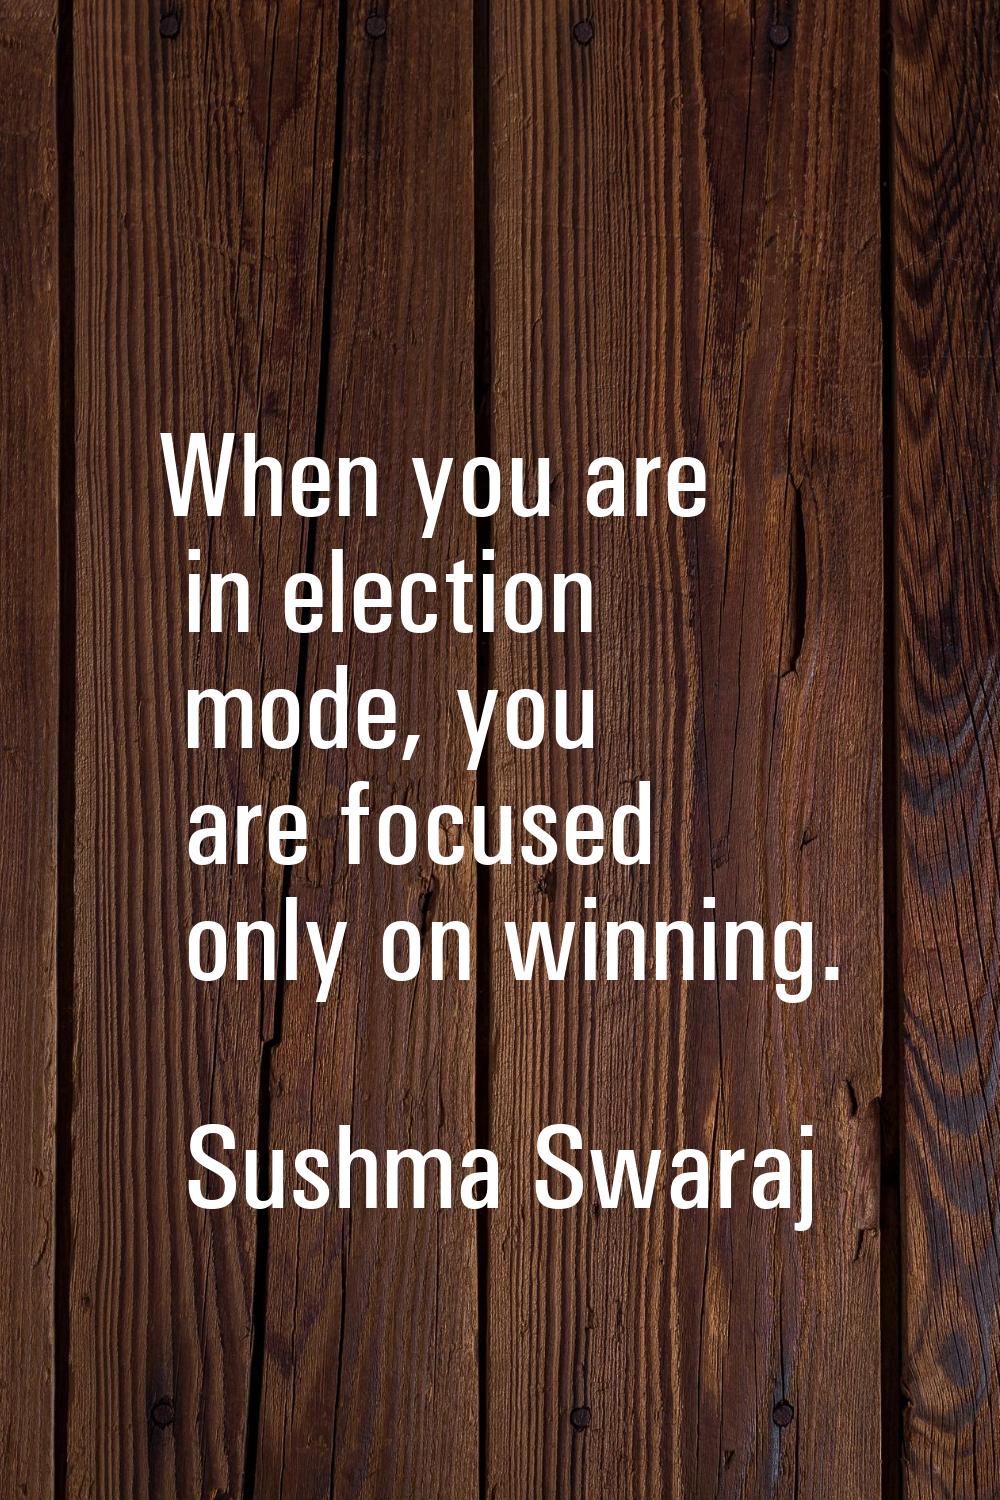 When you are in election mode, you are focused only on winning.